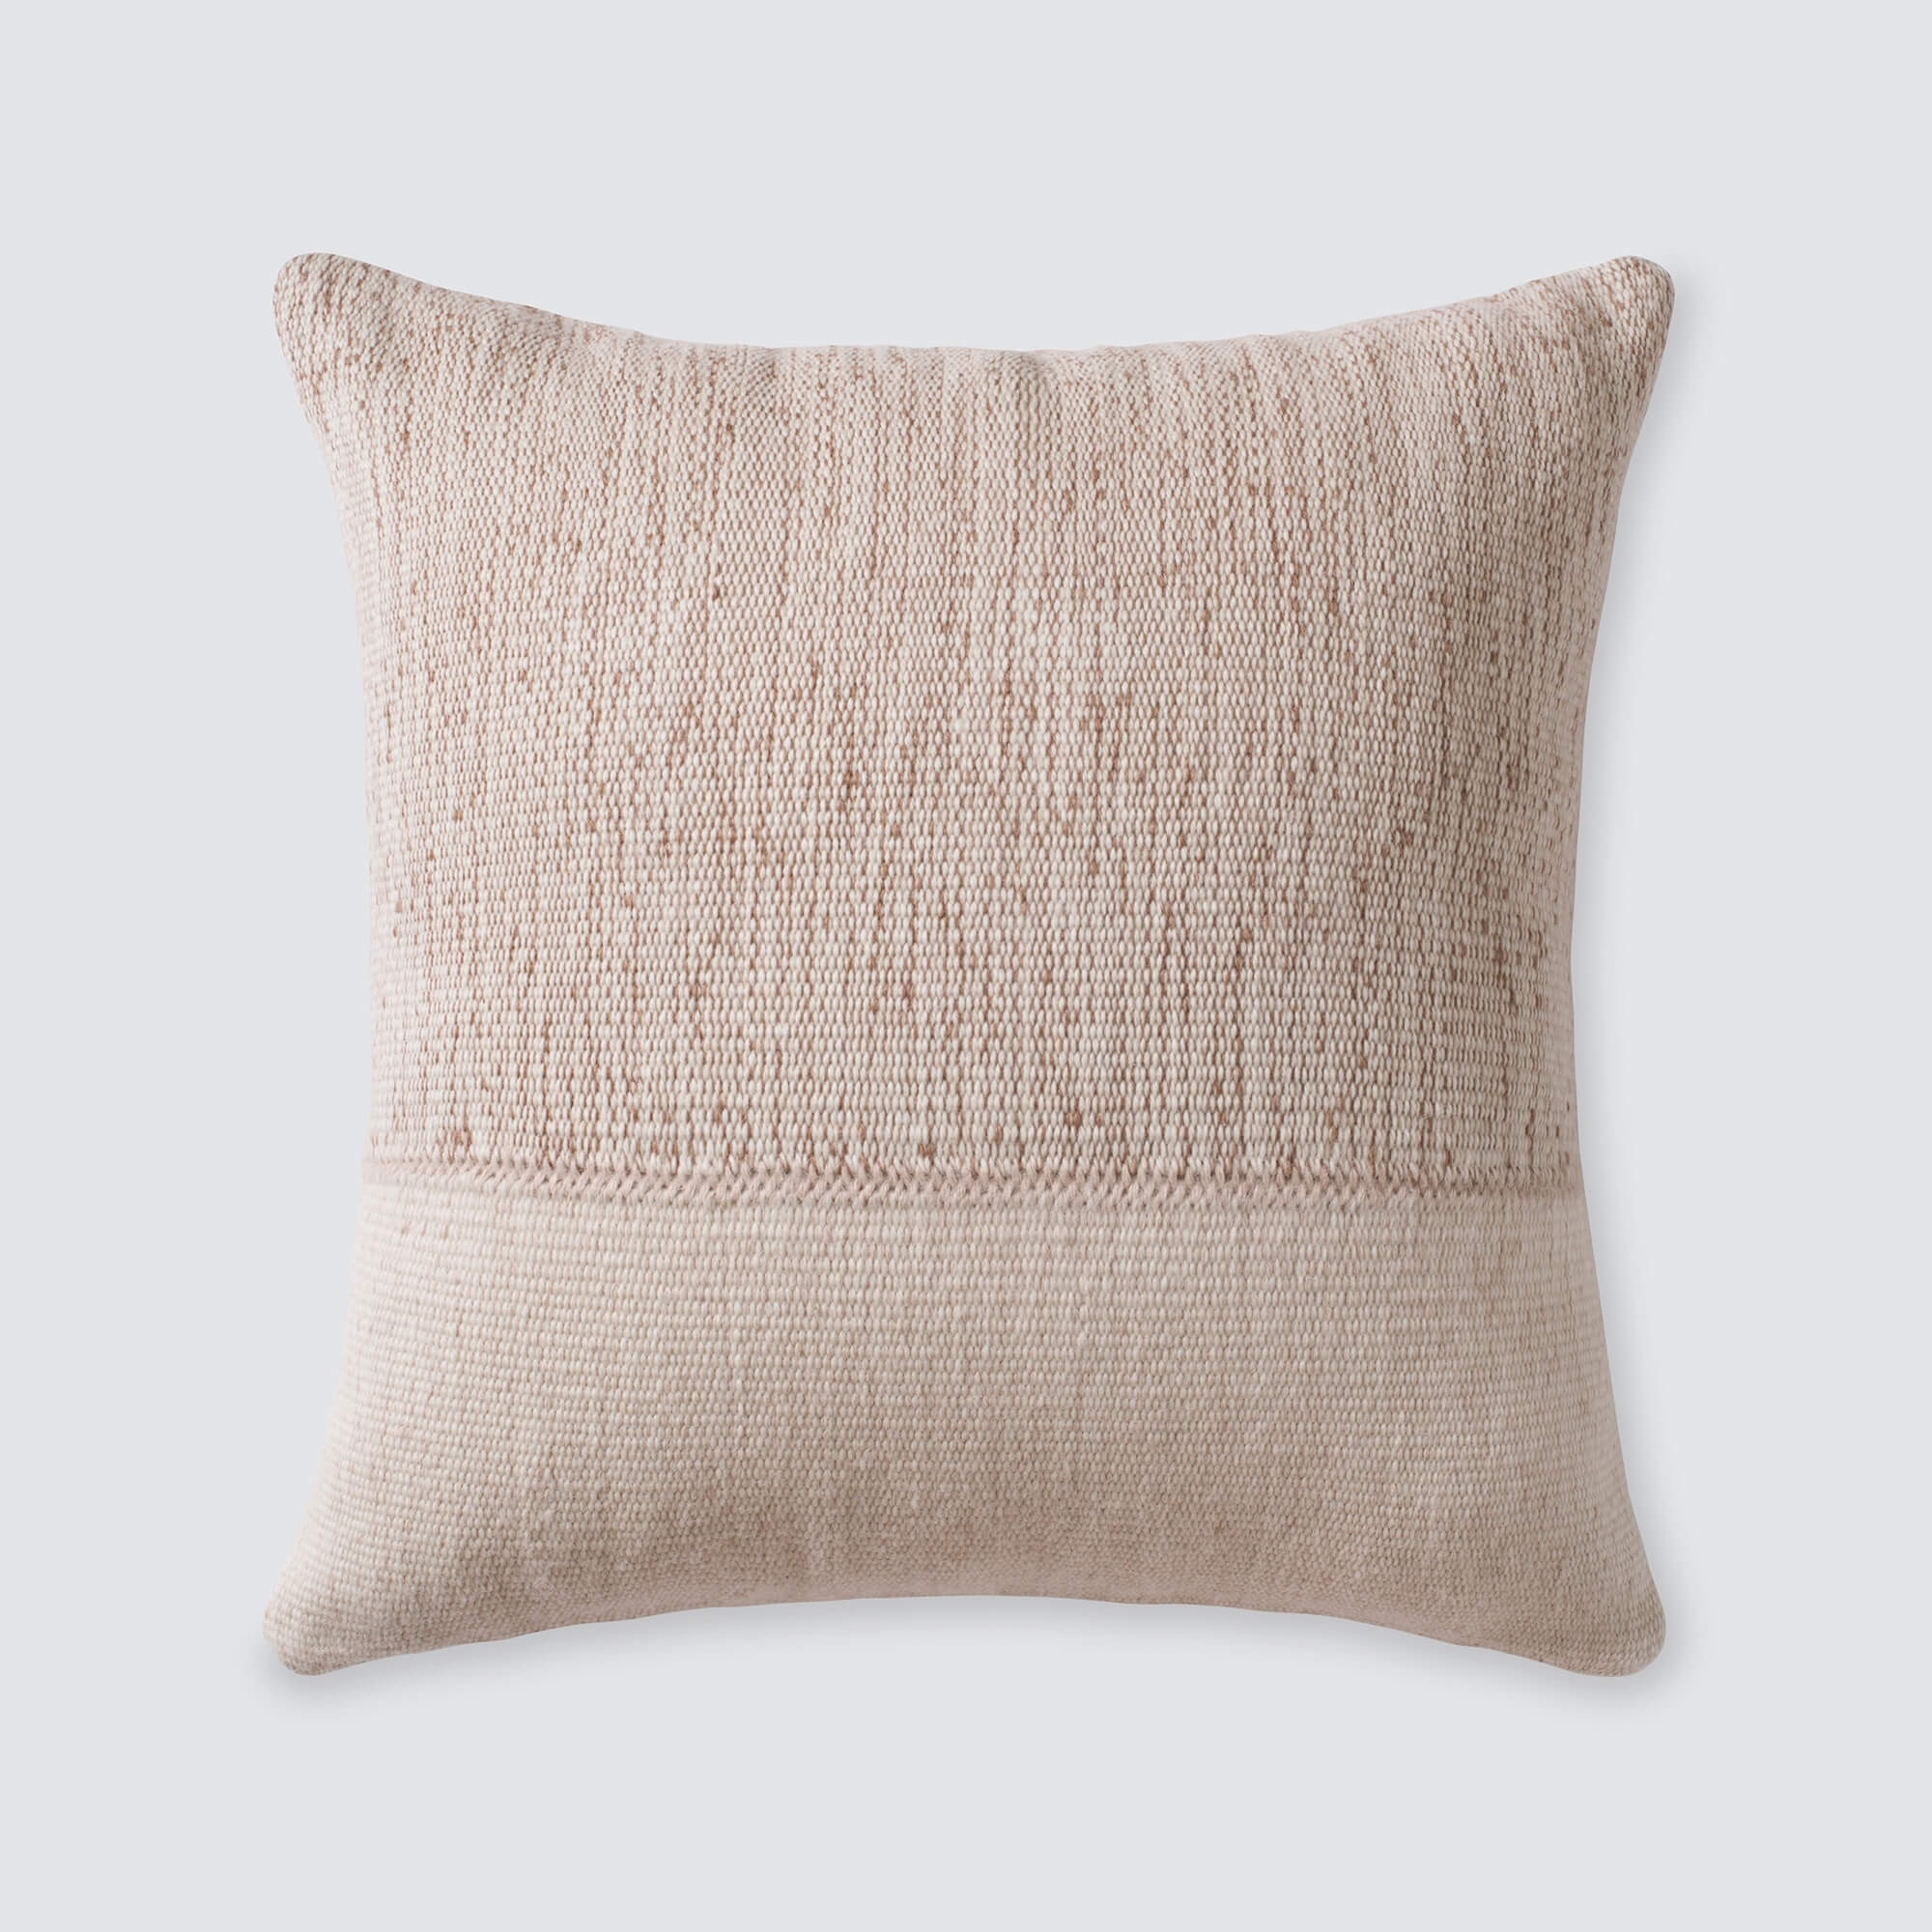 The Citizenry Claro Pillow | 22" x 22" | Grey - Image 1